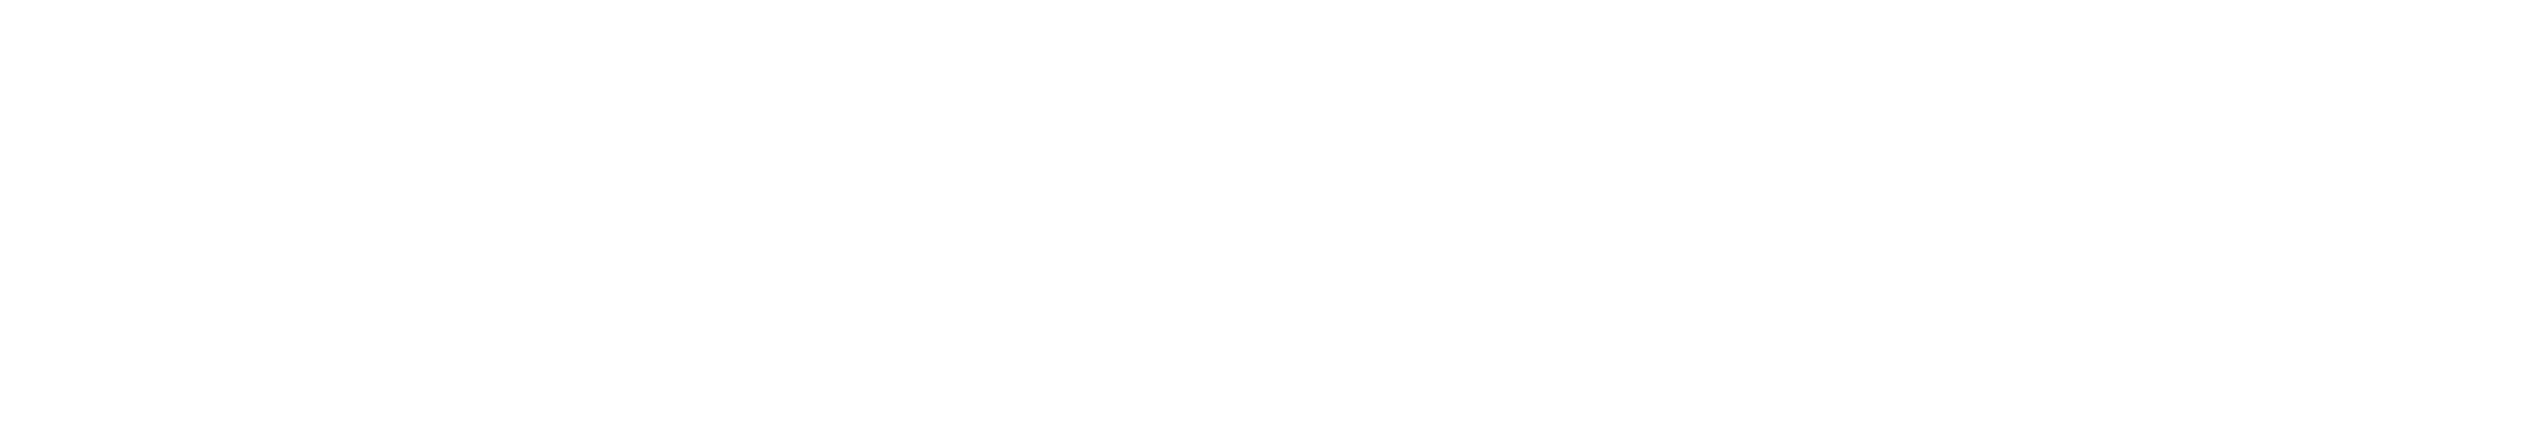 Step Connect2 logo